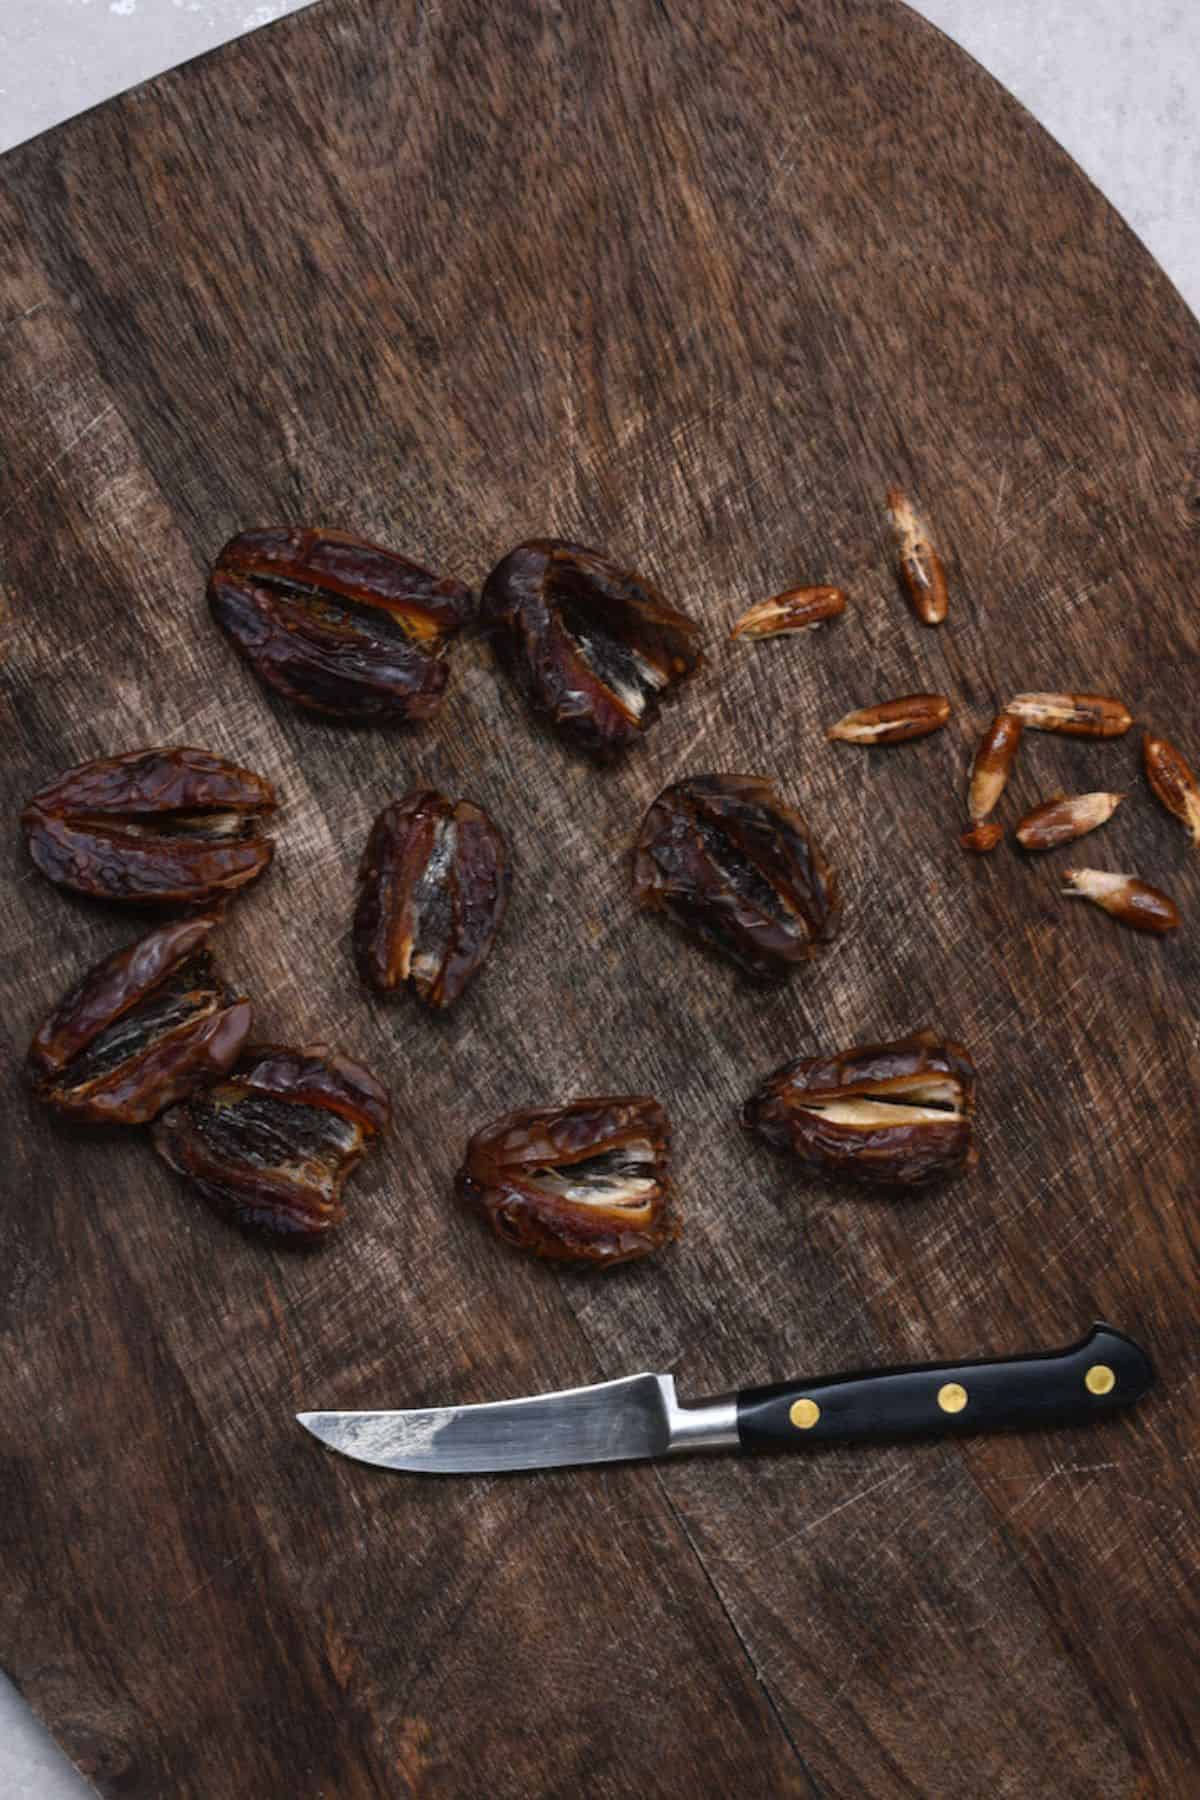 Deseeded dates and a knife on a board